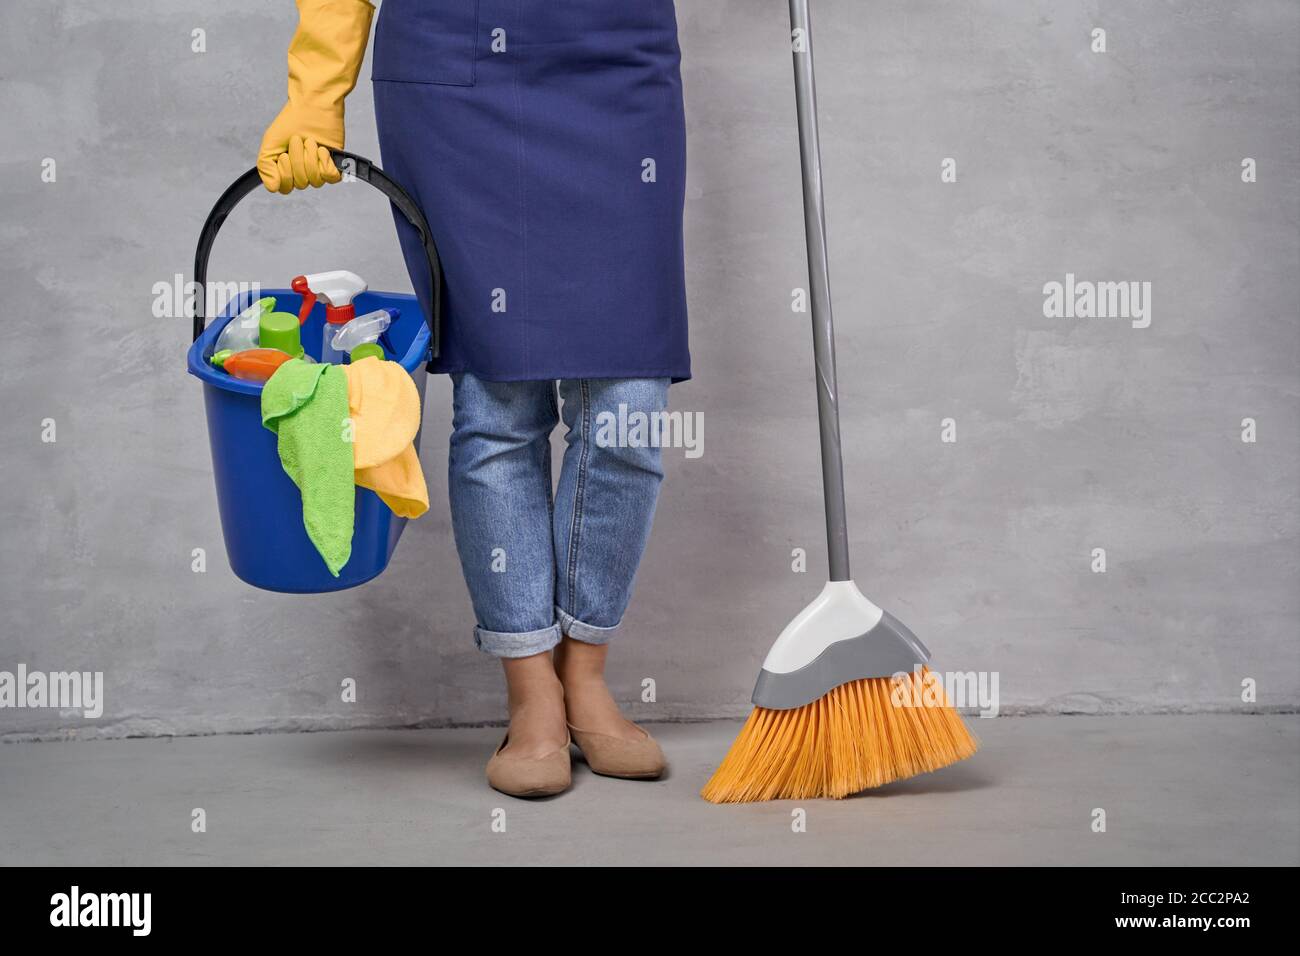 Cleaning the house. Cropped shot of woman in uniform and yellow rubber gloves holding broom and bucket different cleaning products while standing against grey wall. Housekeeping, housework, cleaning Stock Photo